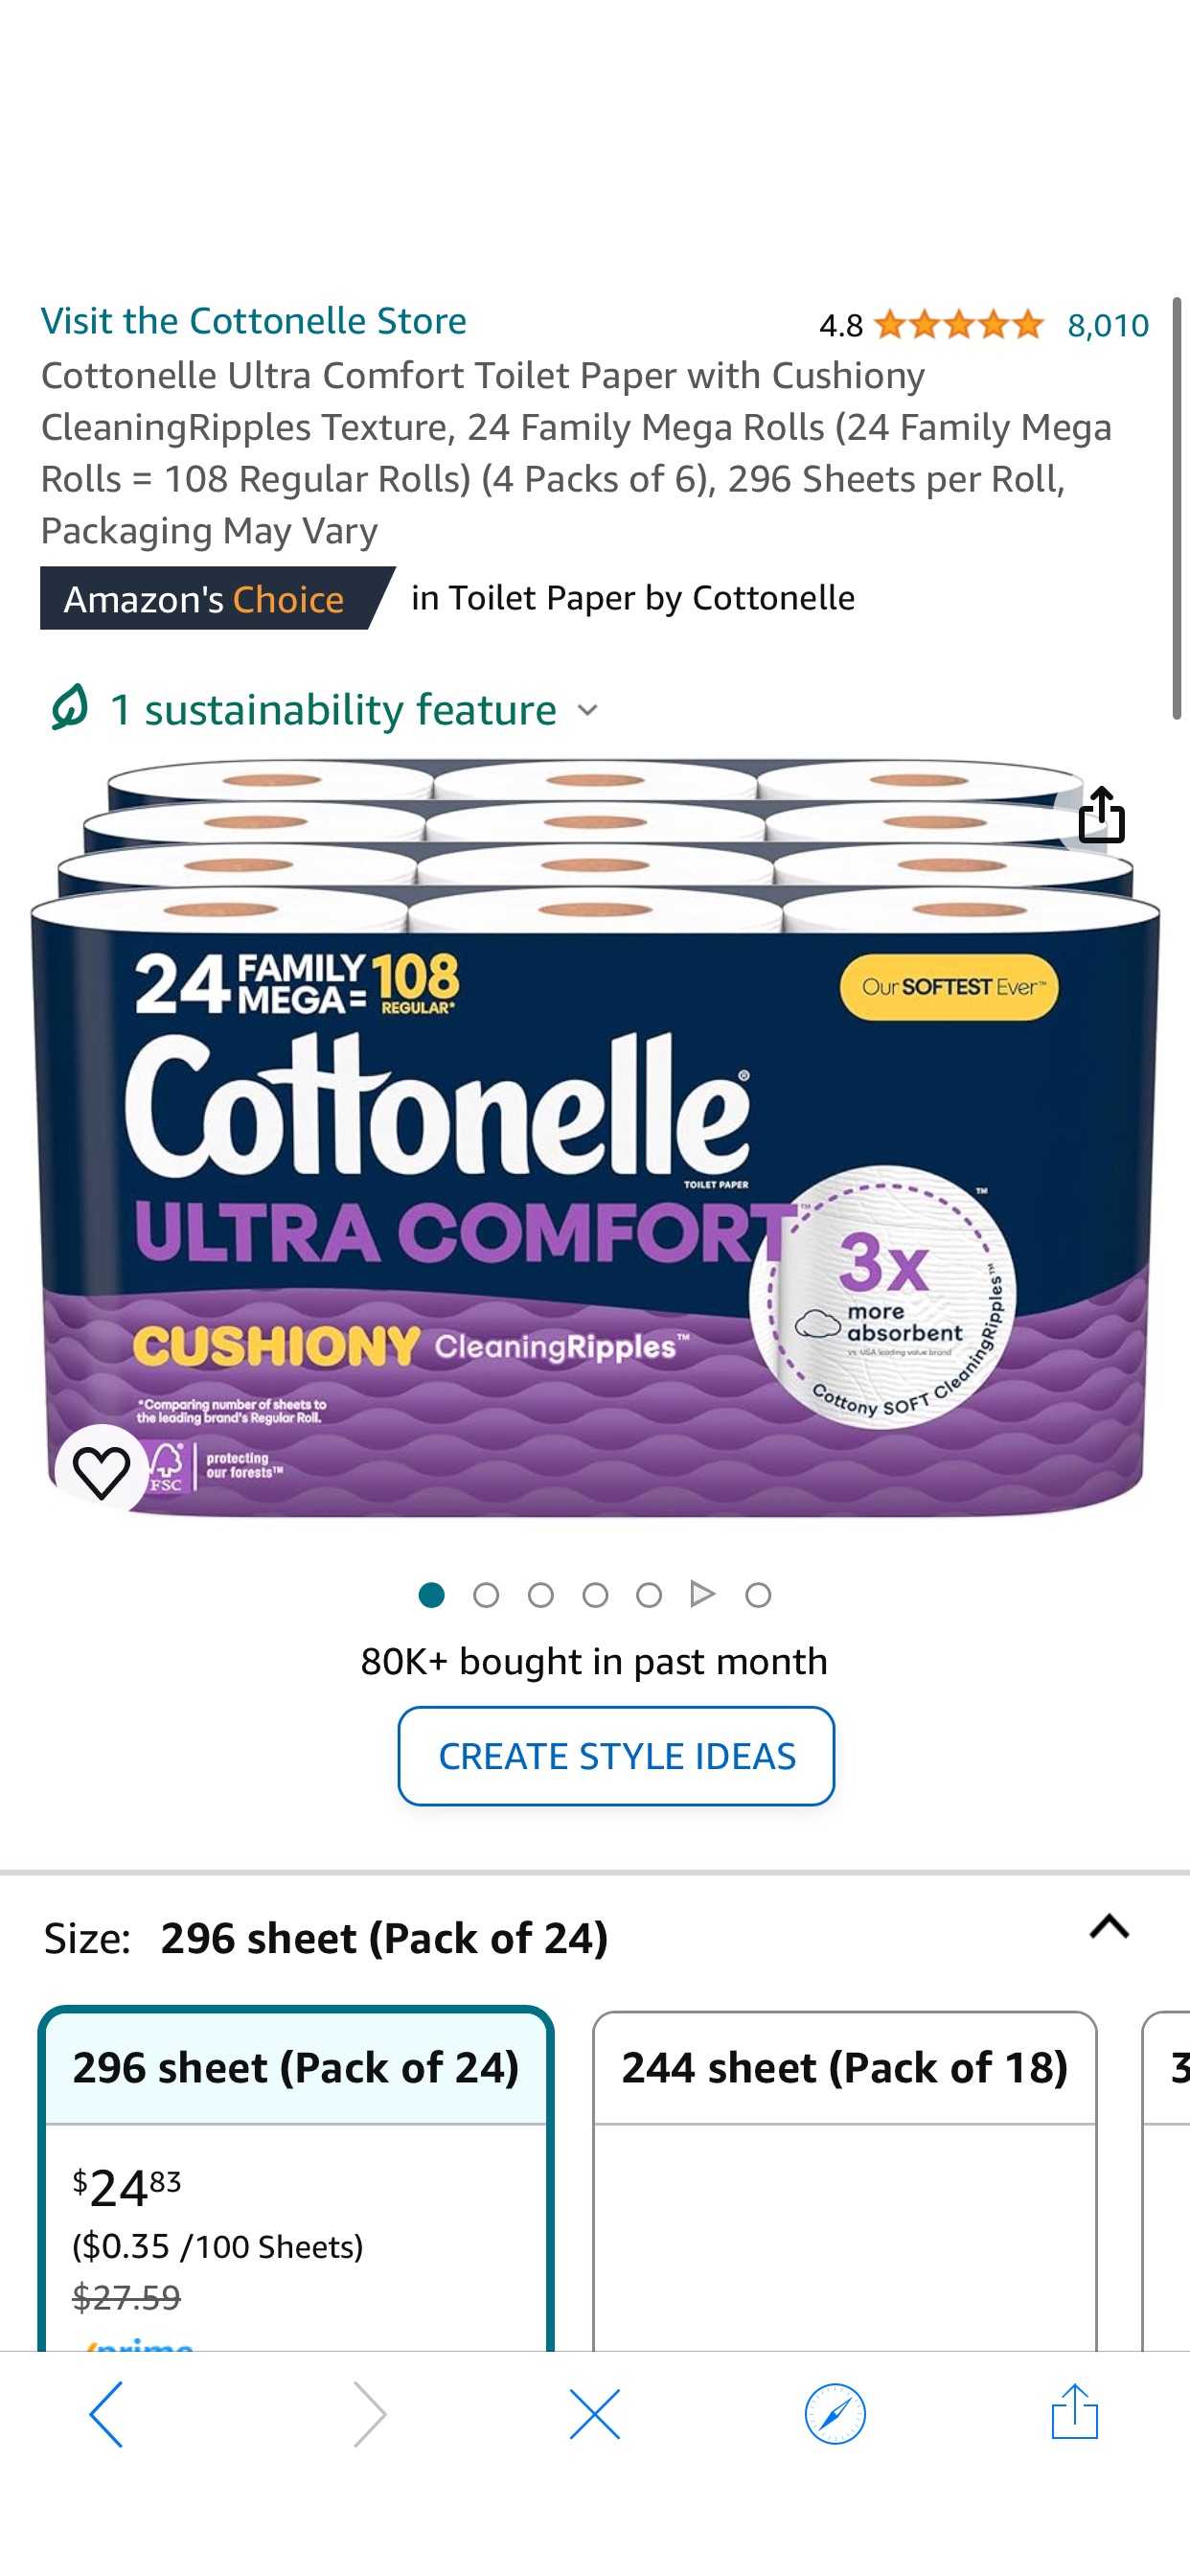 Amazon.com: Cottonelle Ultra Comfort Toilet Paper with Cushiony CleaningRipples Texture, 24 Family Mega Rolls (24 Family Mega Rolls = 108 Regular Rolls) (4 Packs of 6), 296 Sheets per Roll, Packaging 